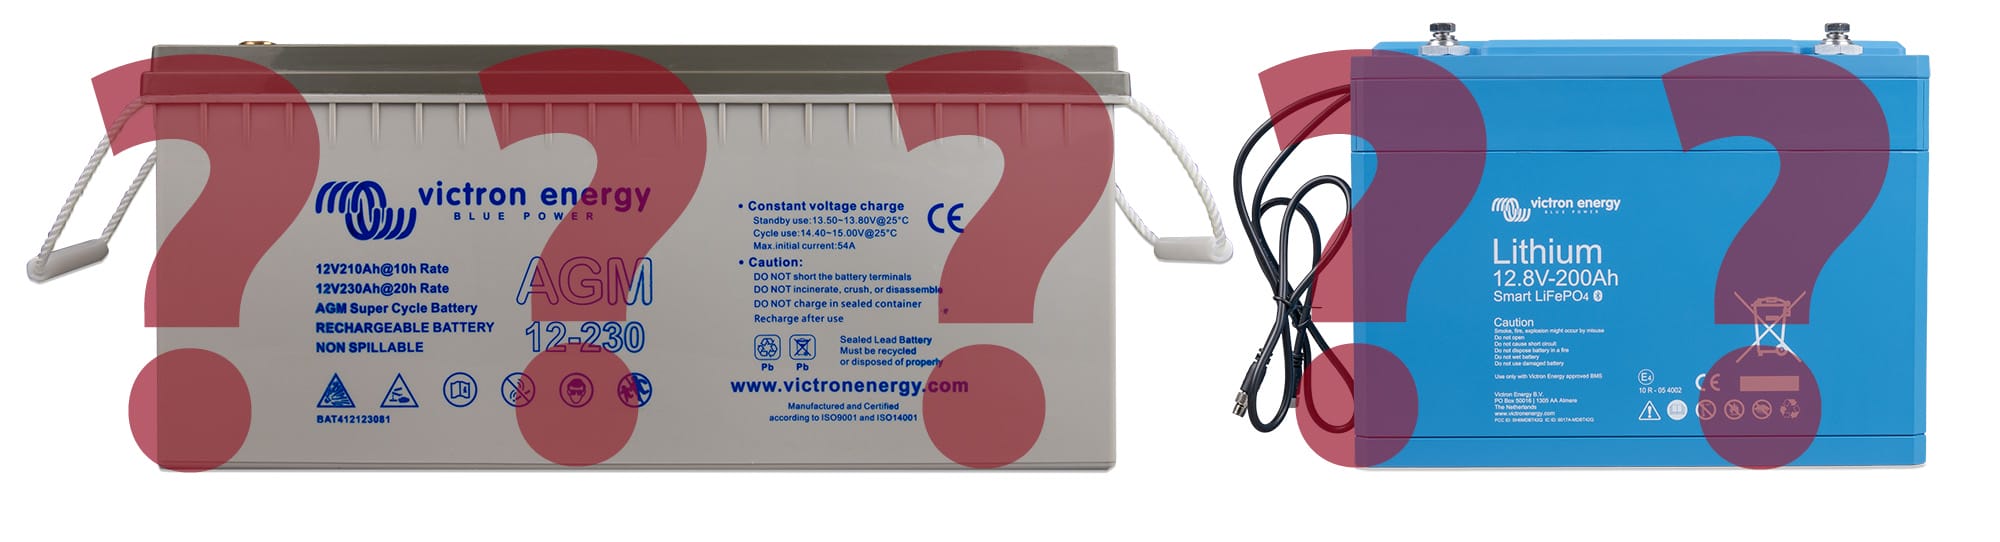 A Simple Way to Decide Between Lithium or Lead-Acid Batteries for a Cruising Boat